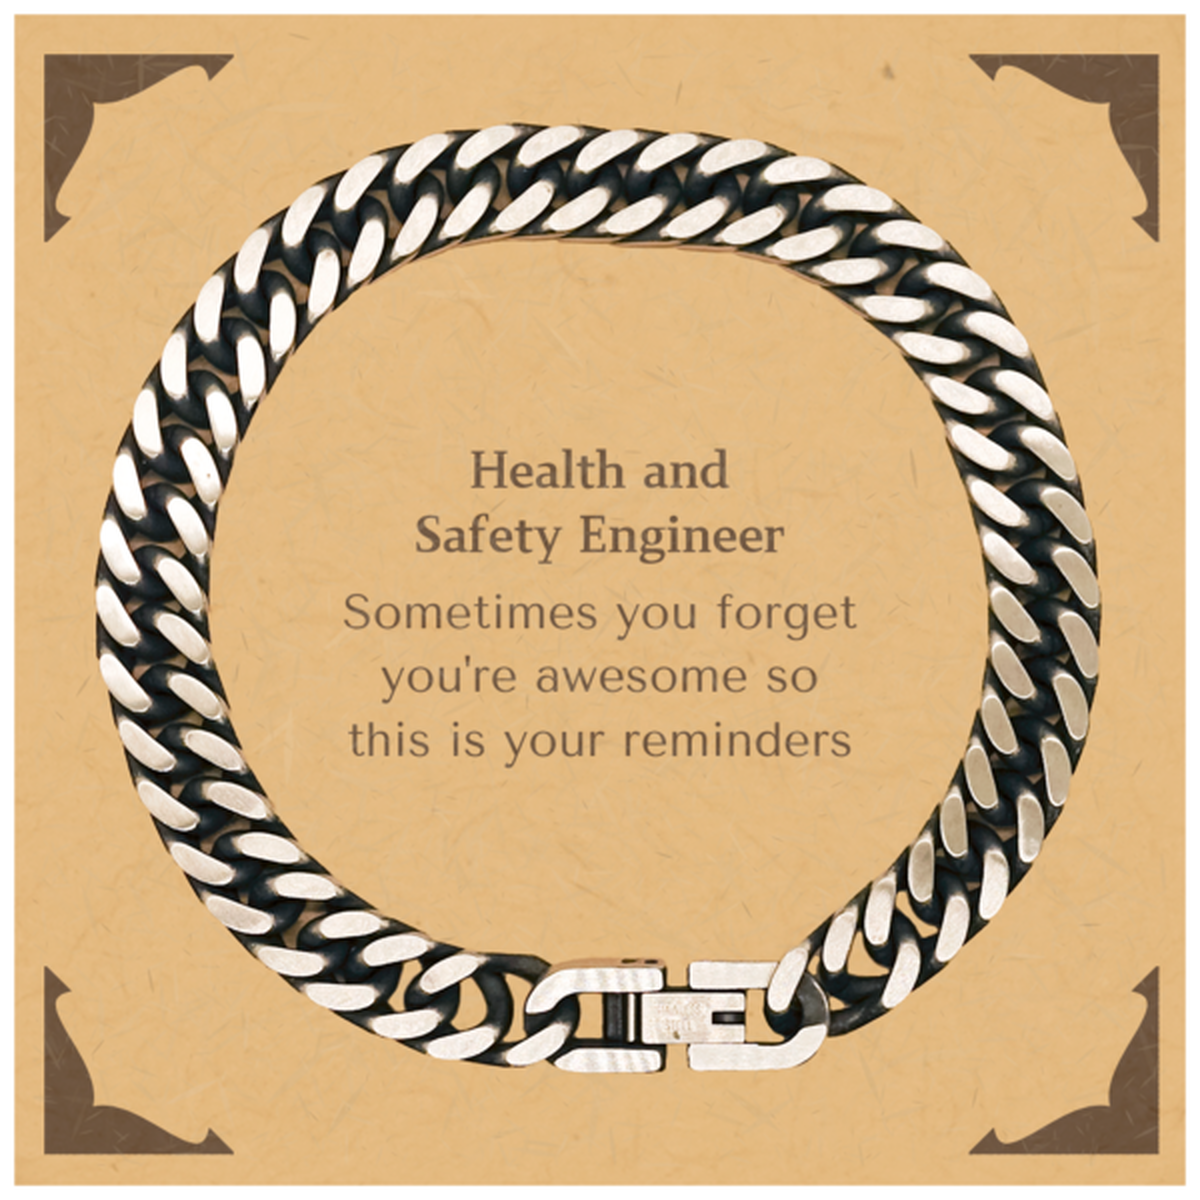 Sentimental Health and Safety Engineer Cuban Link Chain Bracelet, Health and Safety Engineer Sometimes you forget you're awesome so this is your reminders, Graduation Christmas Birthday Gifts for Health and Safety Engineer, Men, Women, Coworkers